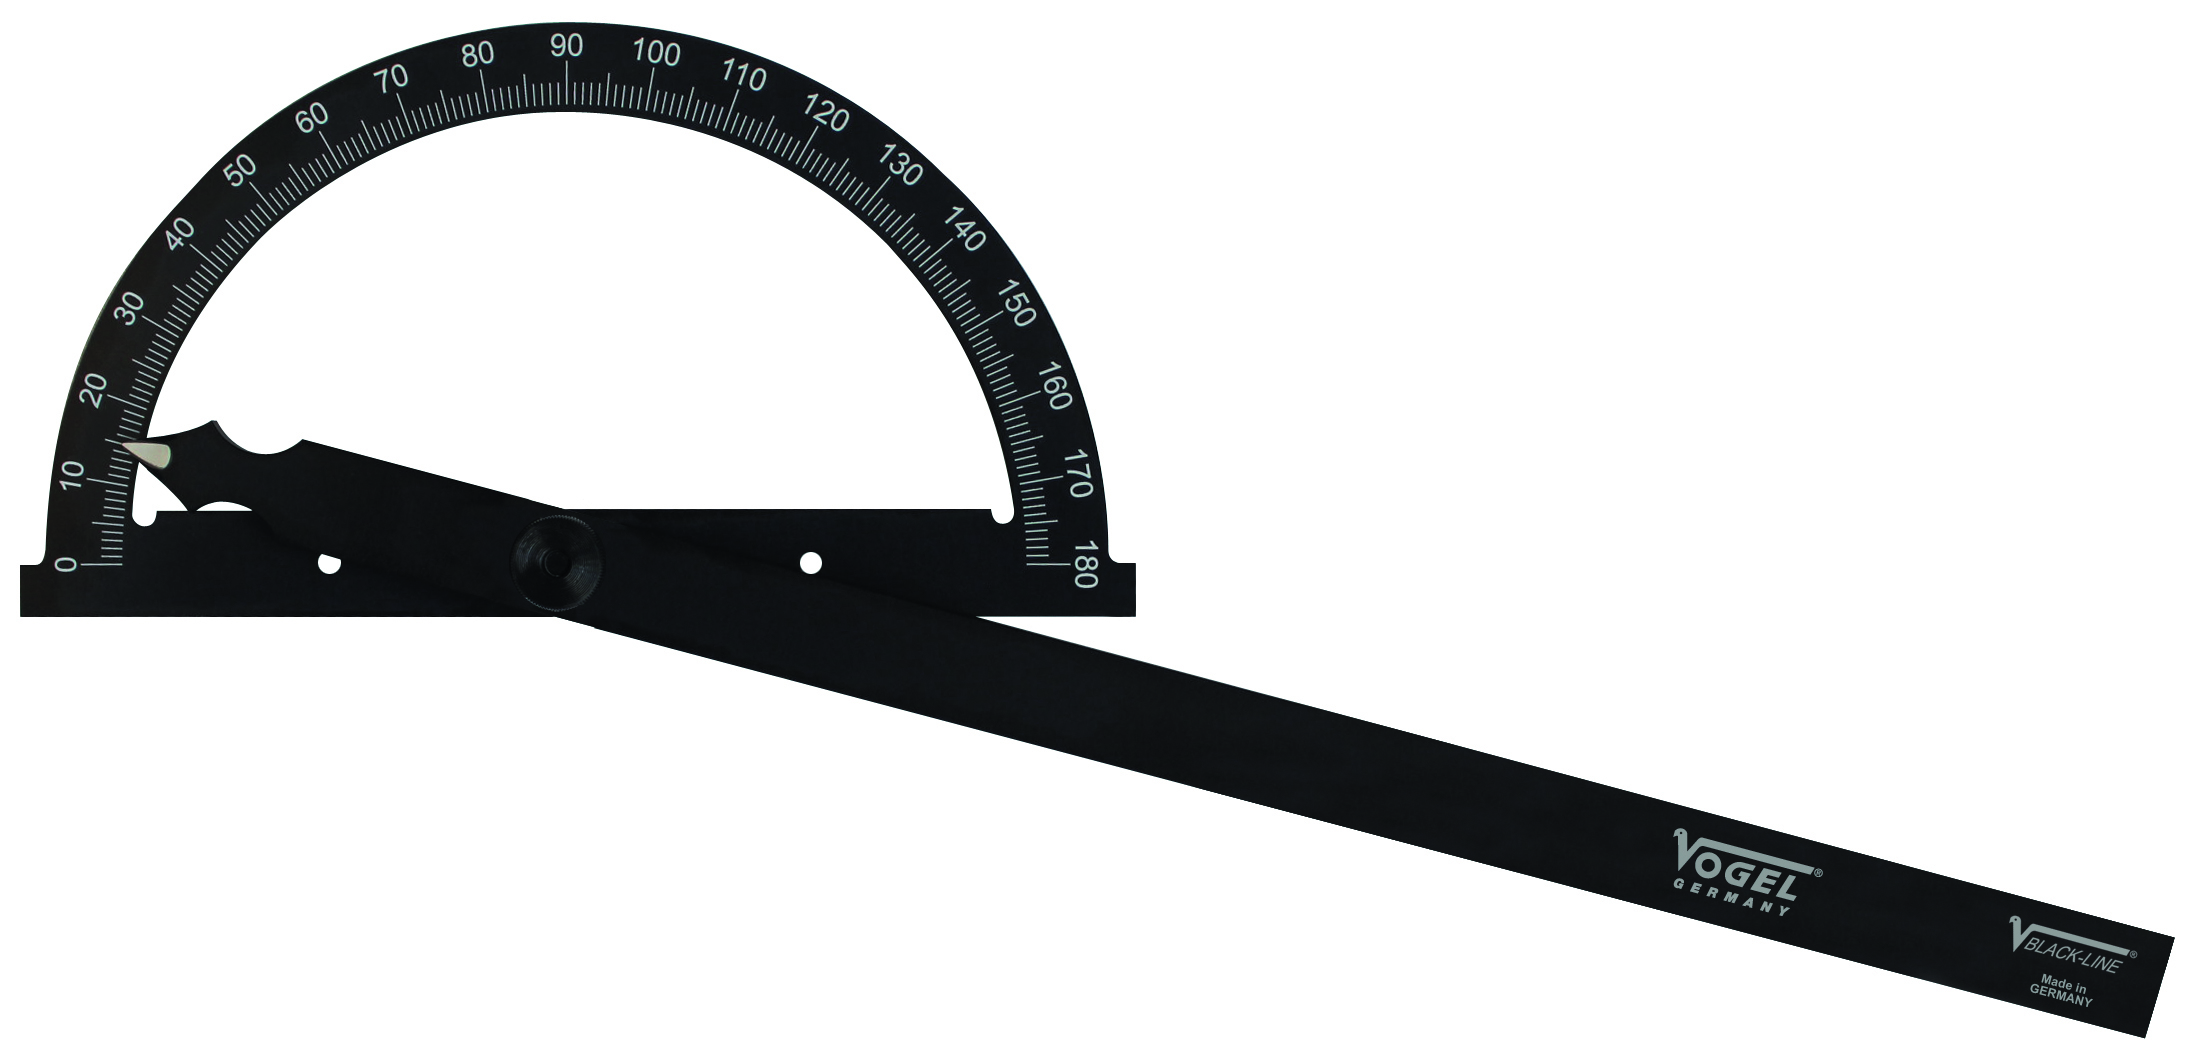 Protractor - angles